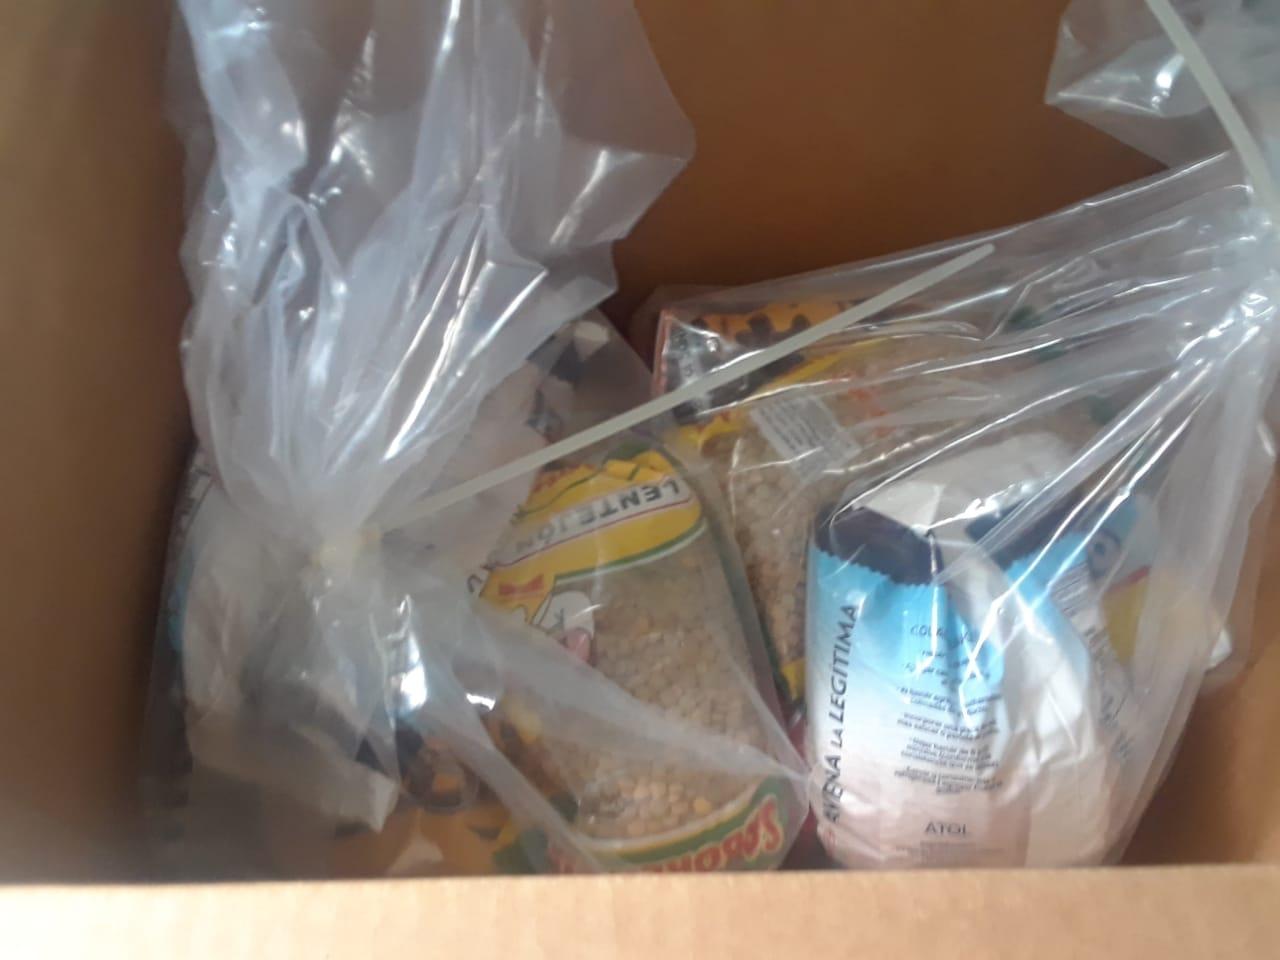 Food package given out daily to poor during pandemic in Guayaquil.